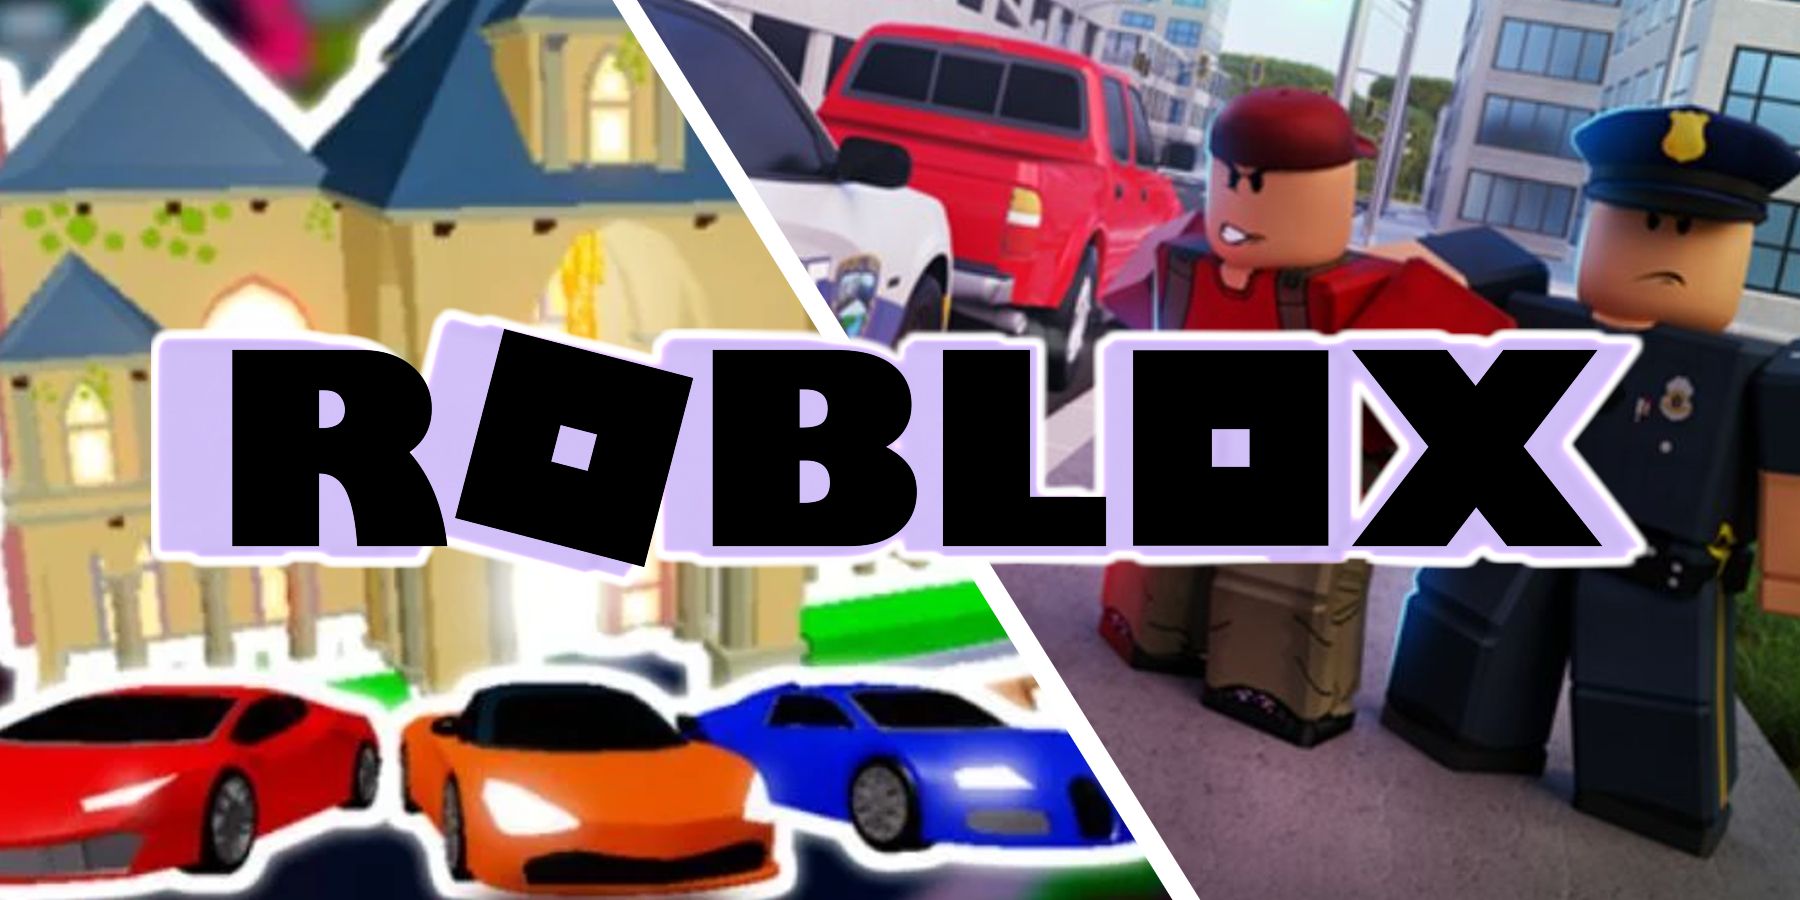 5 best roleplay games on Roblox